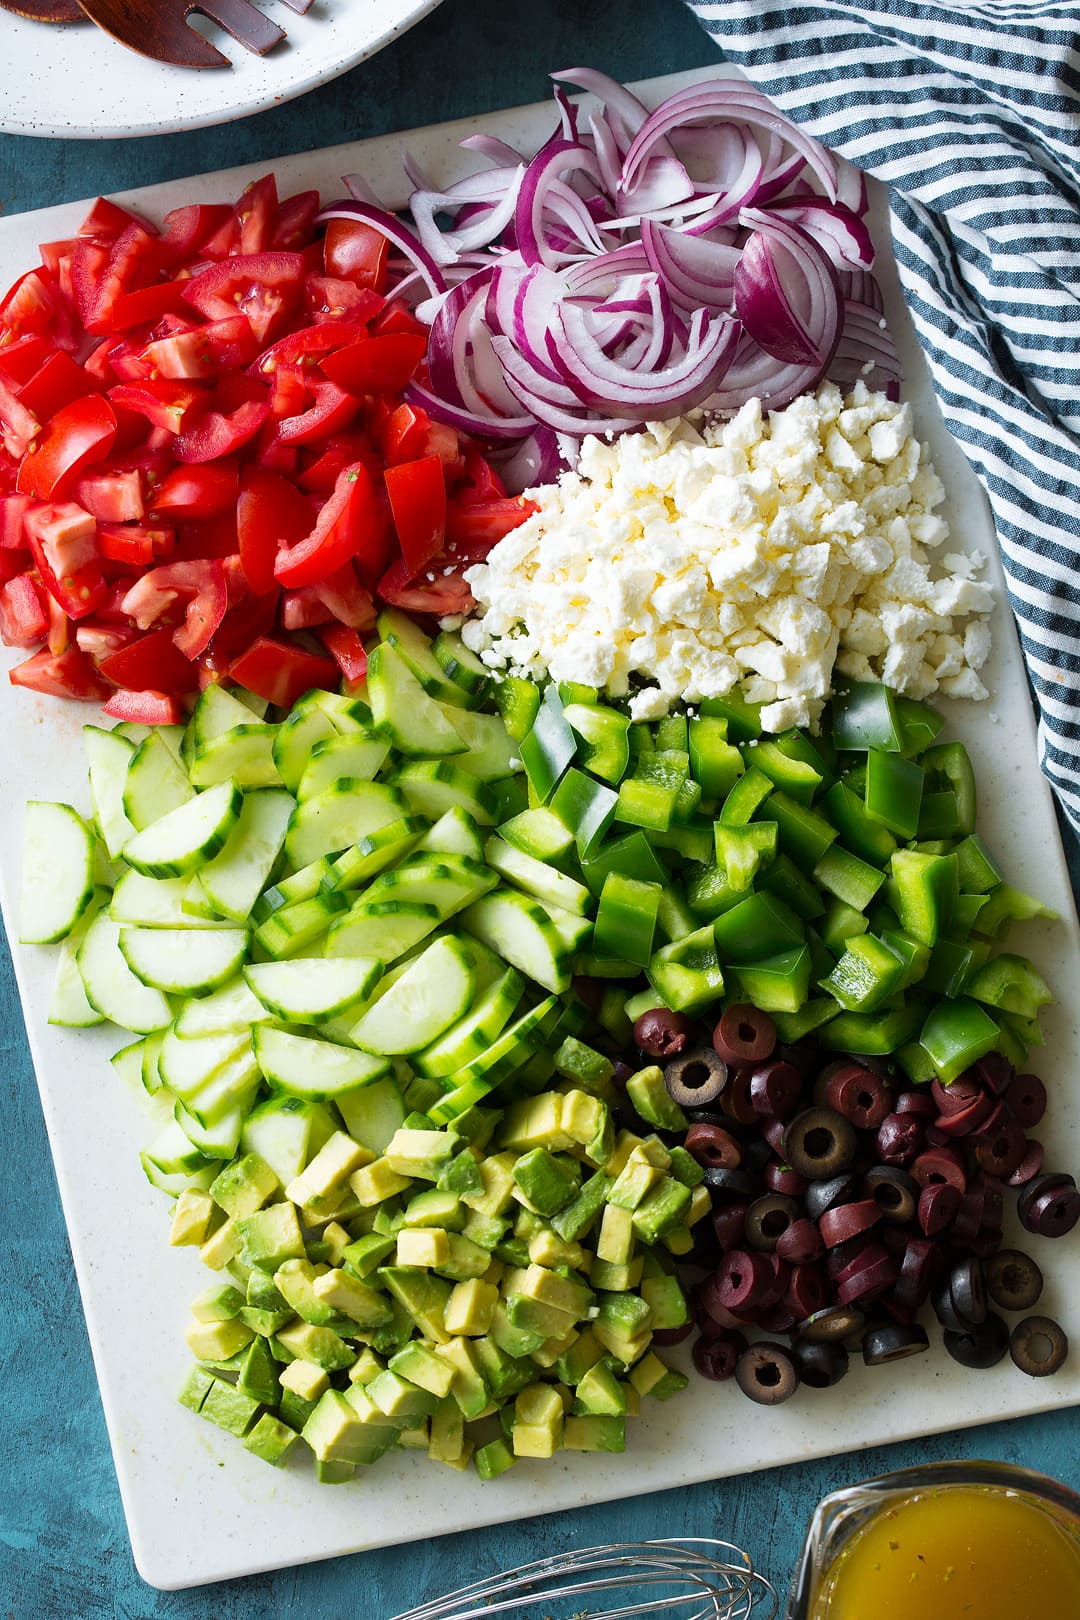 Ingredients for making a Greek Salad chopped up on a cutting board